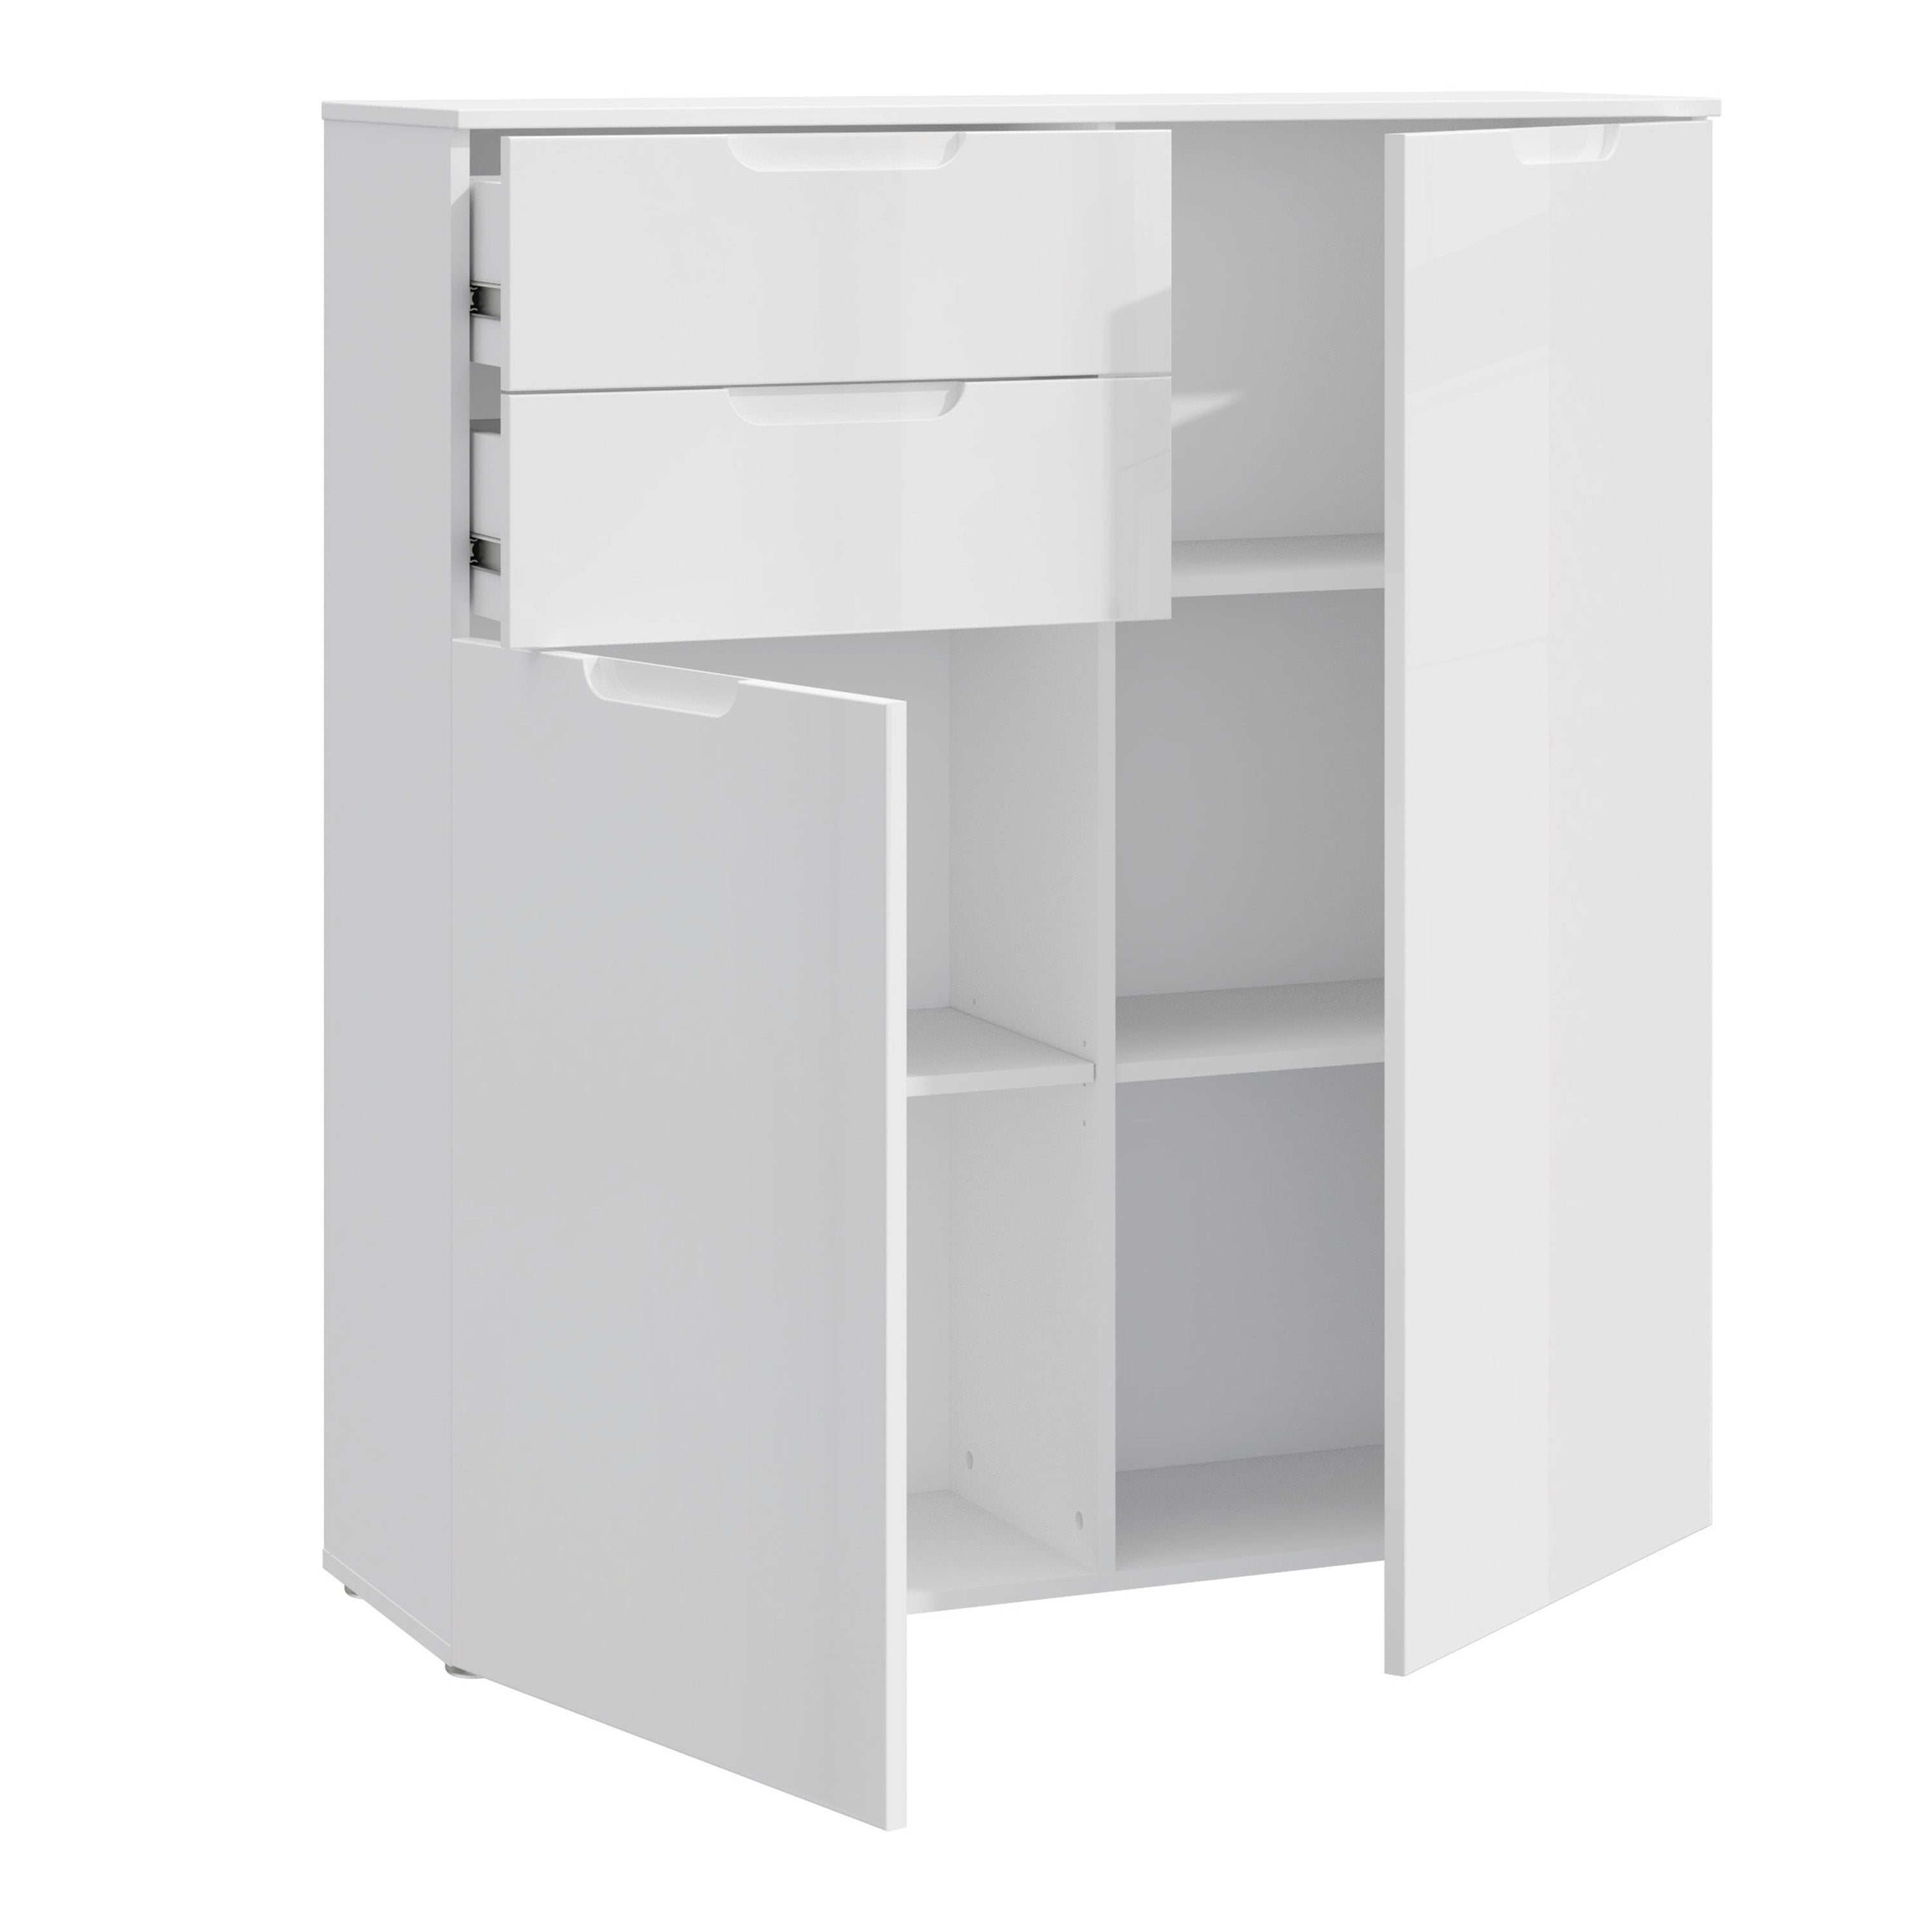 Sienna Chest of Drawers in White/White High Gloss